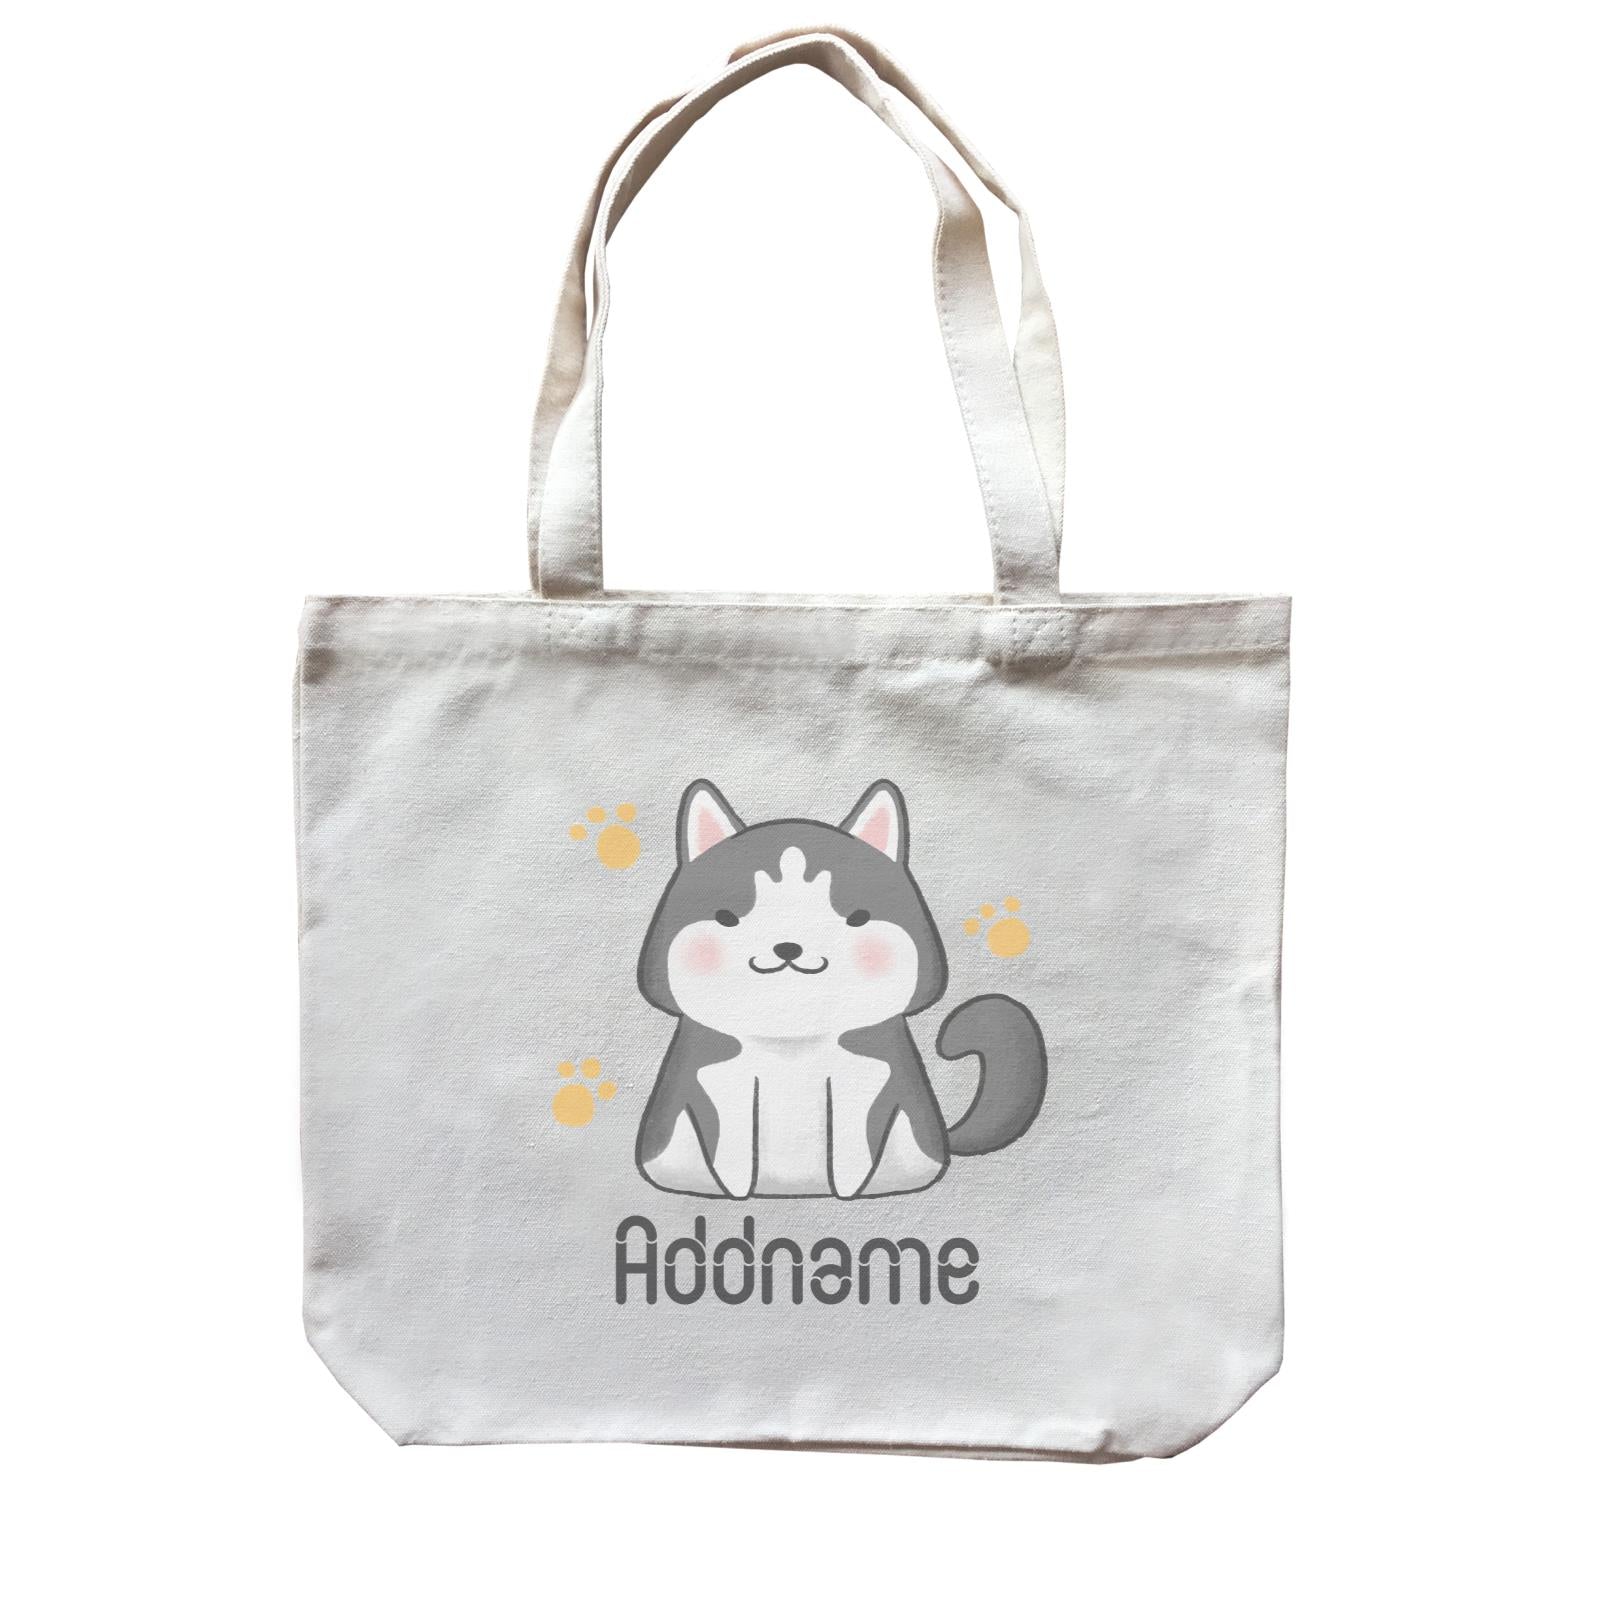 Cute Hand Drawn Style Husky Addname Canvas Bag